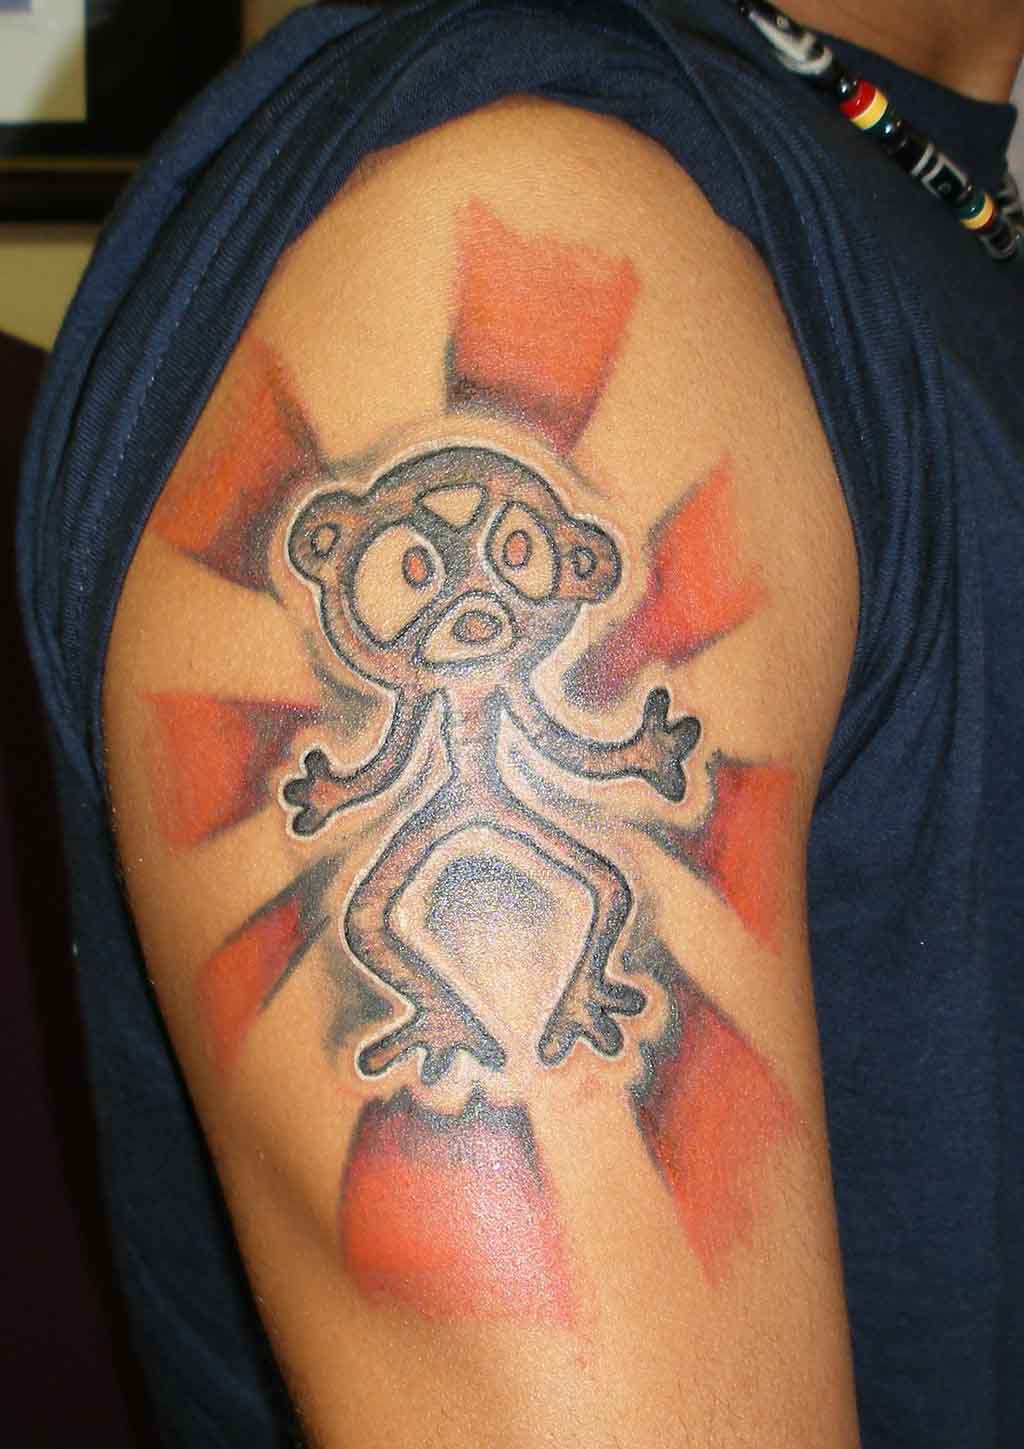 Taino Sun Tattoo On Right Bicep by Colo Redplanet